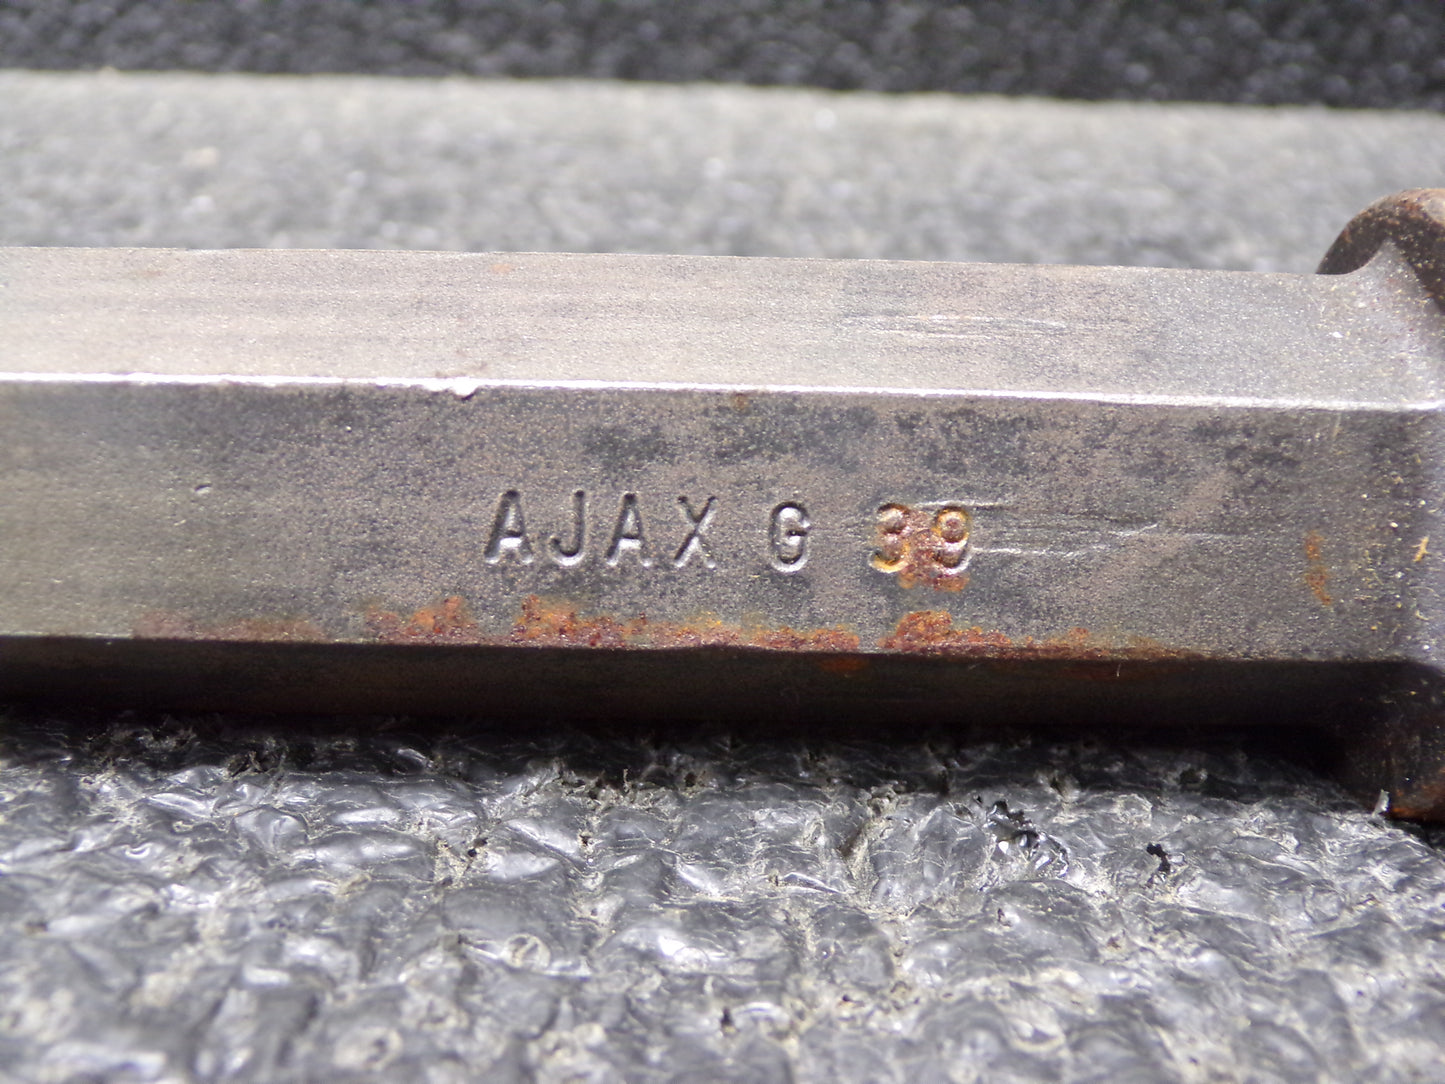 Ajax Tools 14 in (355.6 mm) Under Collar Length; 1 x 4-1/4 in (25.4 x 108 mm) Shank Size; Standard Moil Point Chisel (CR00439-BT04)